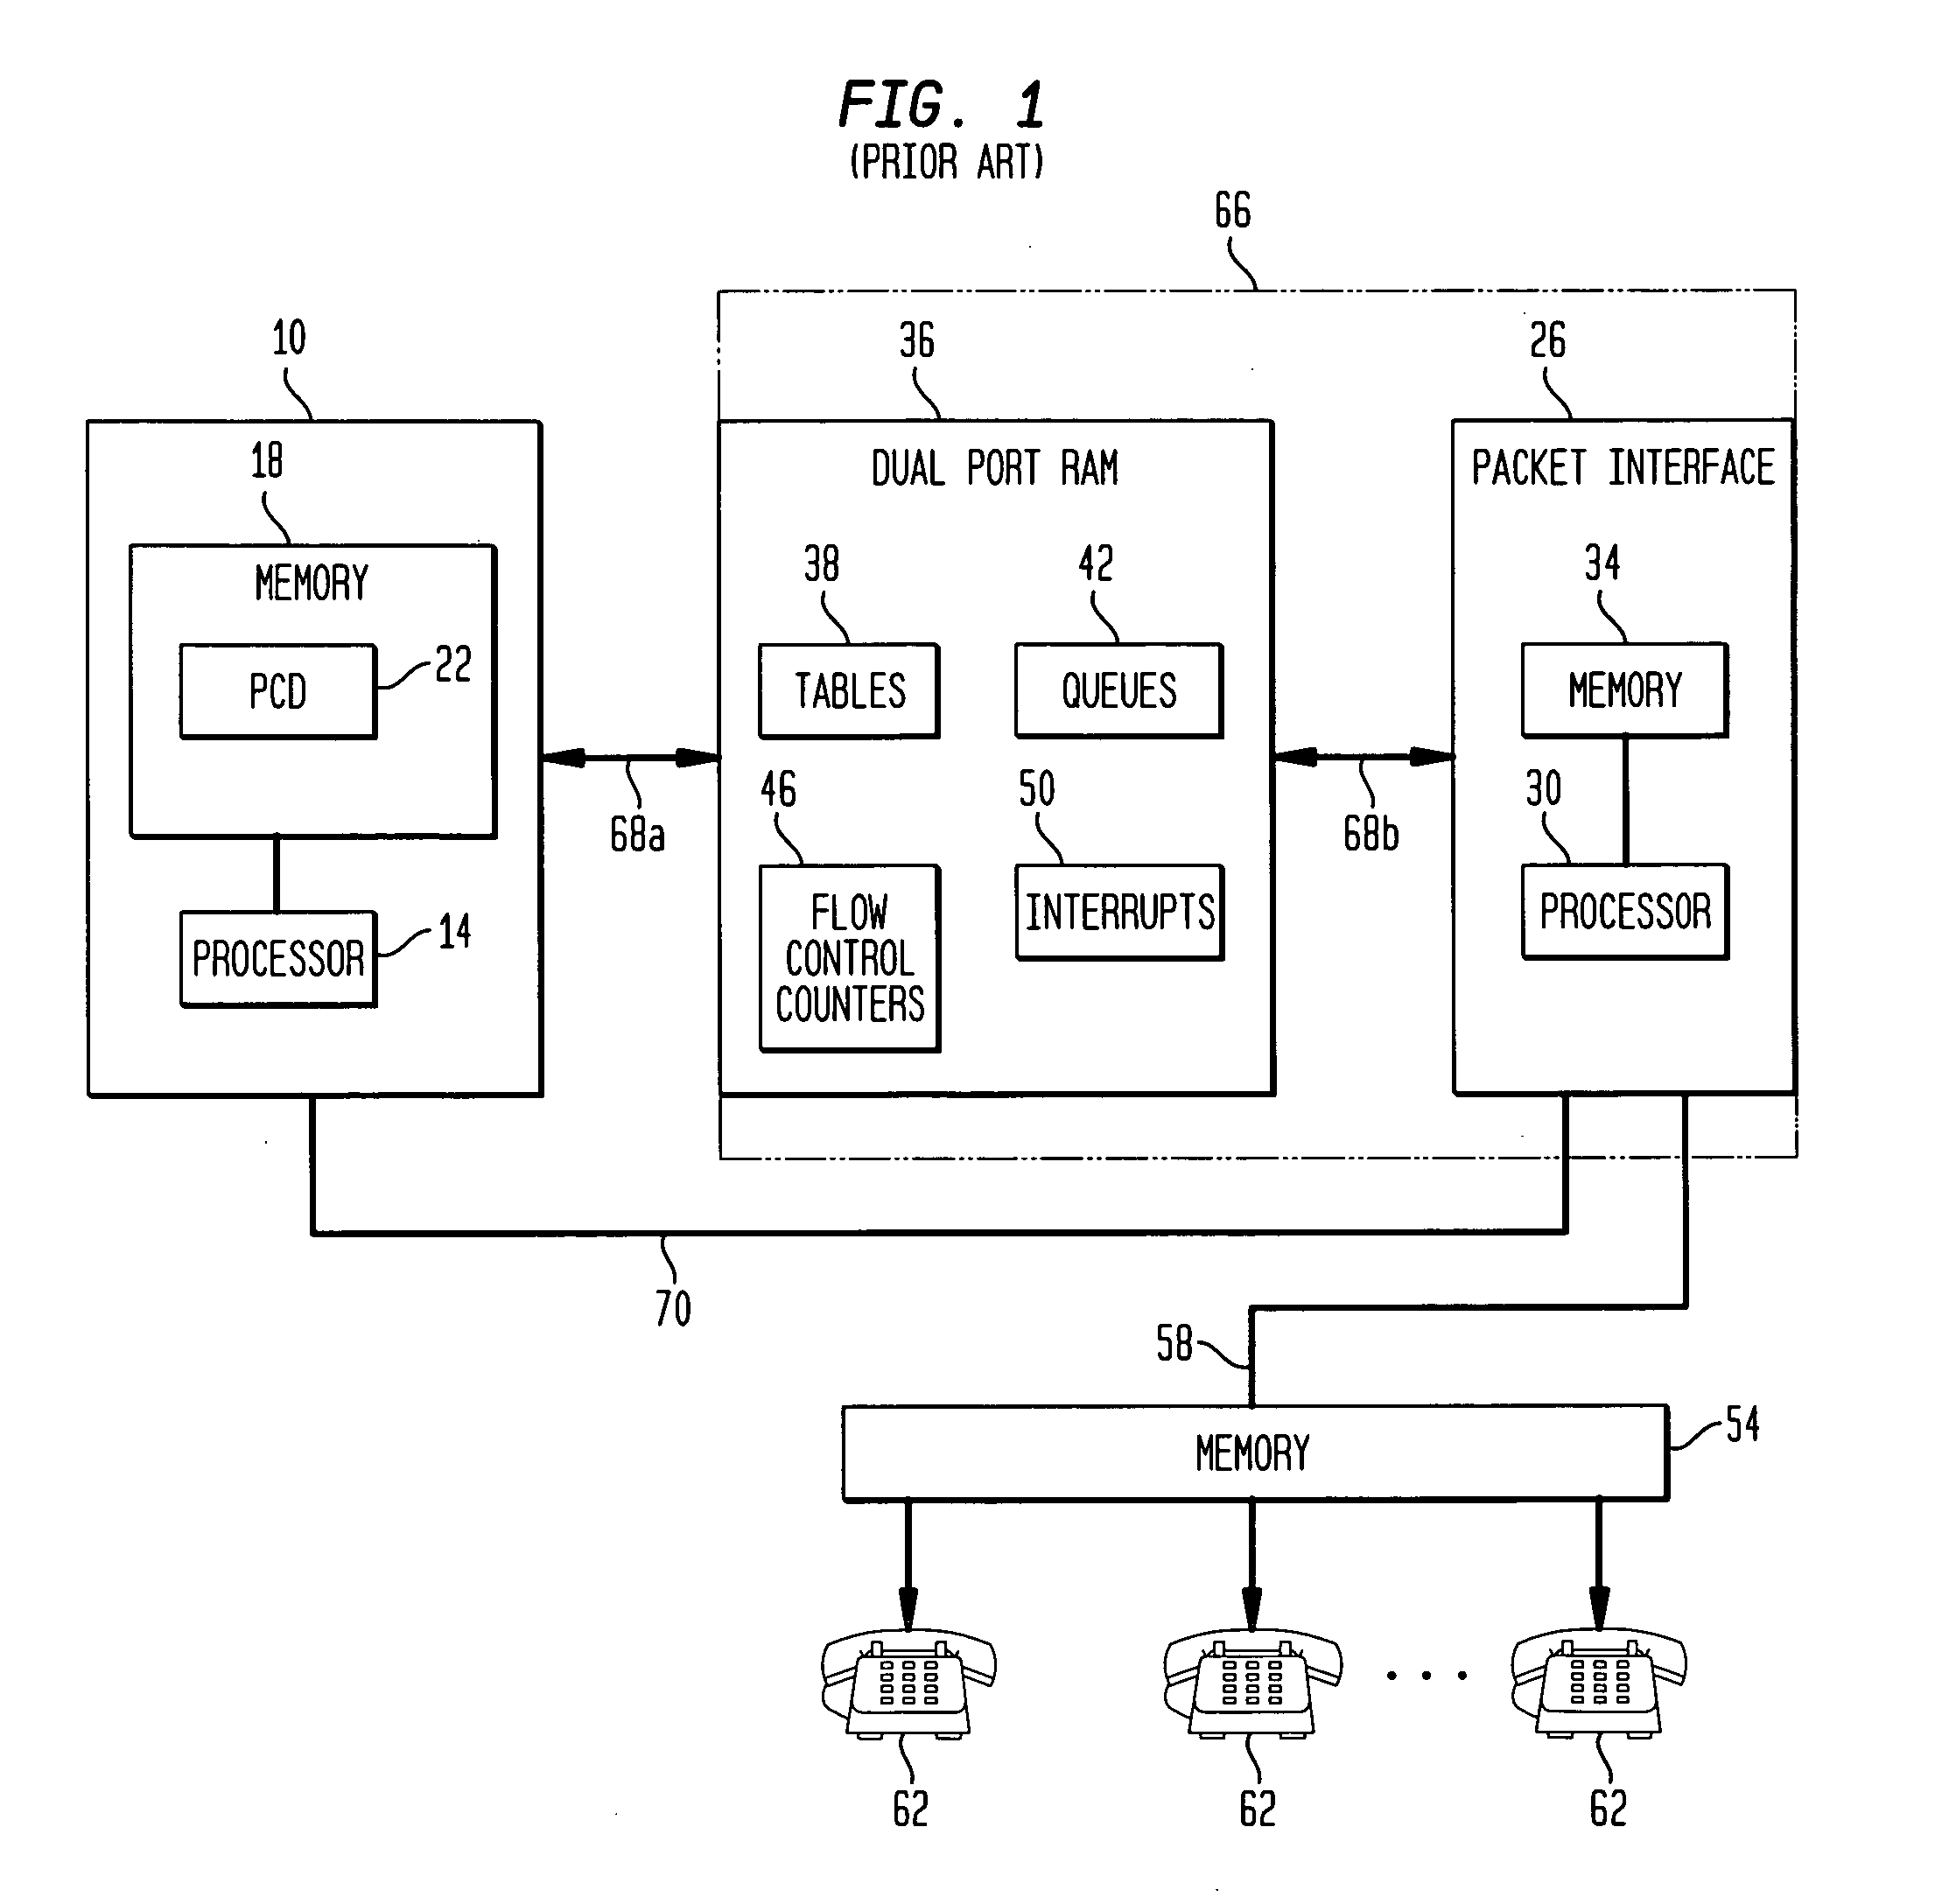 Message format and flow control for replacement of the packet control driver/packet interface dual port RAM communication